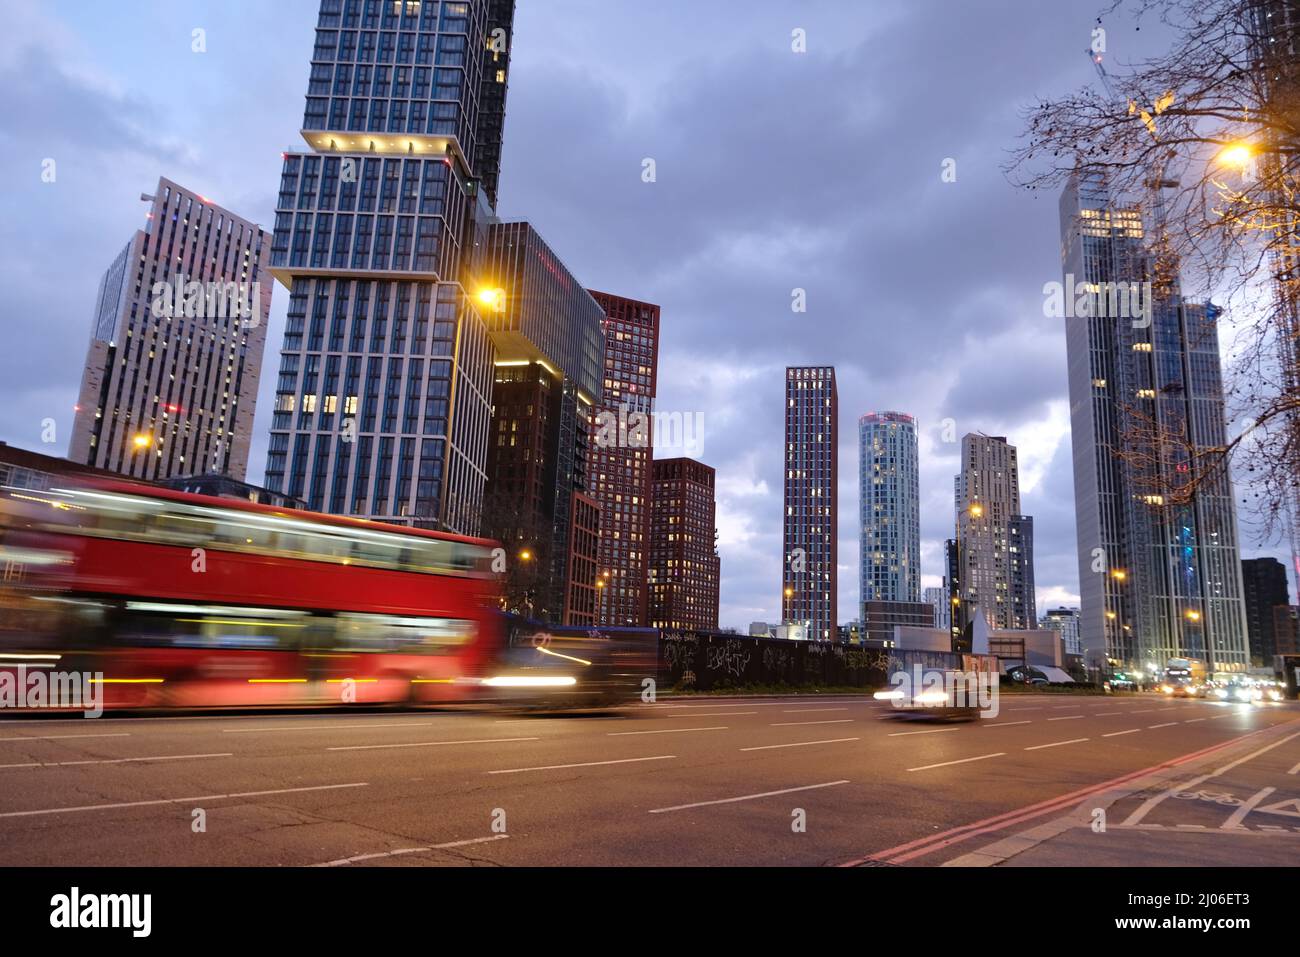 London, UK. A bus passes by at dusk in Vauxhall with new towerblocks seen in the background. Stock Photo